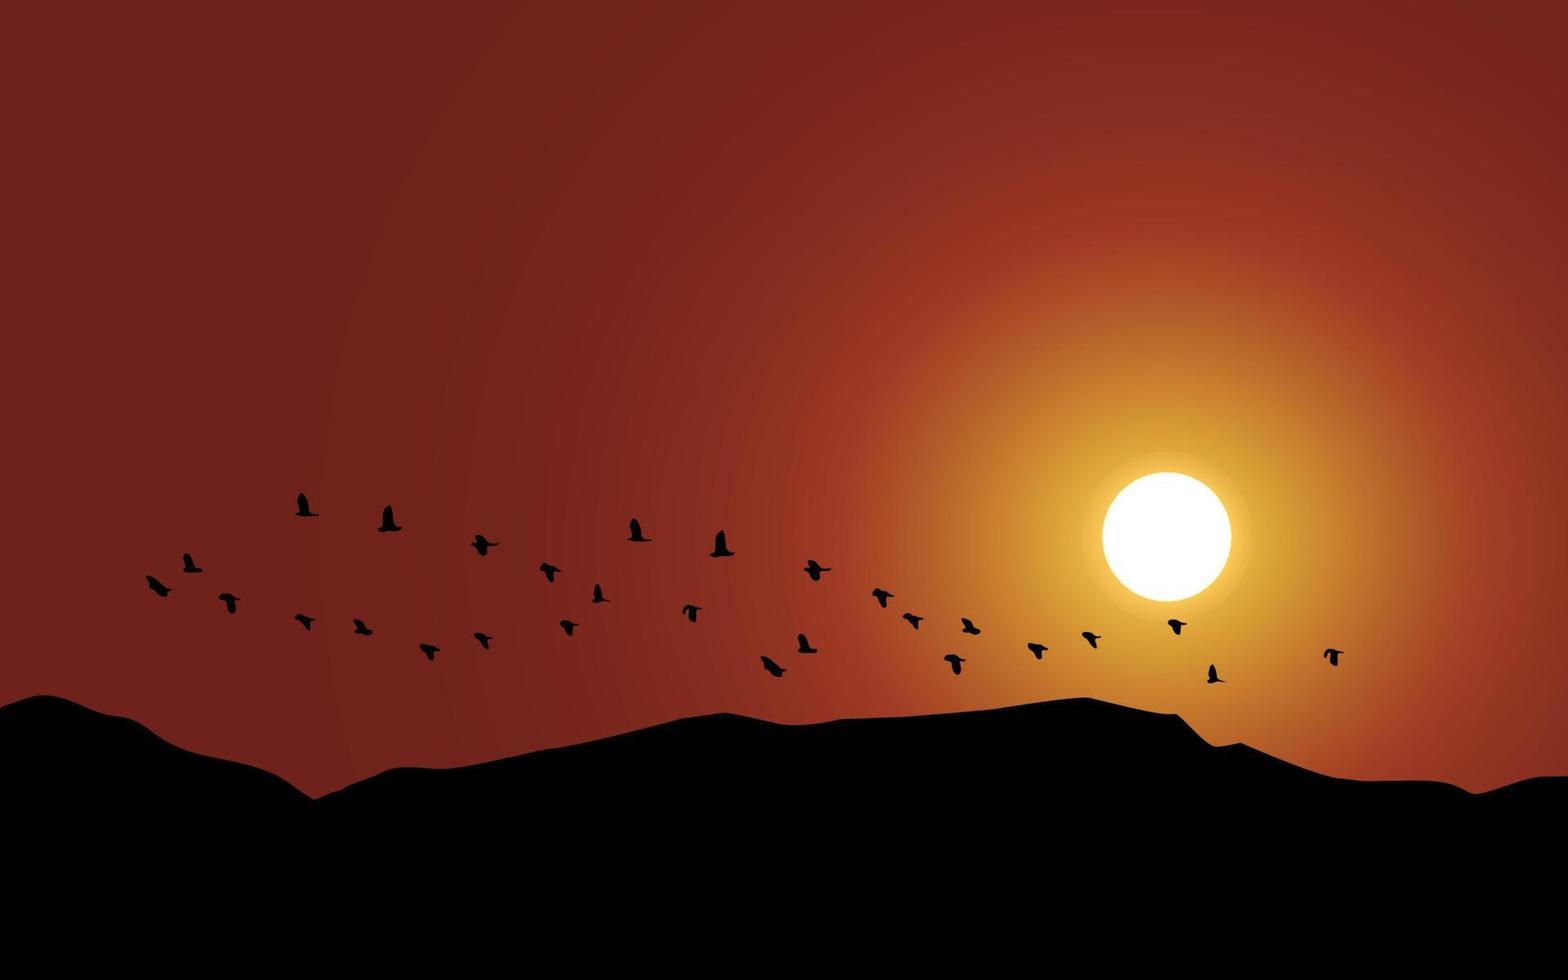 Hill sunset with flying birds in silhouette vector